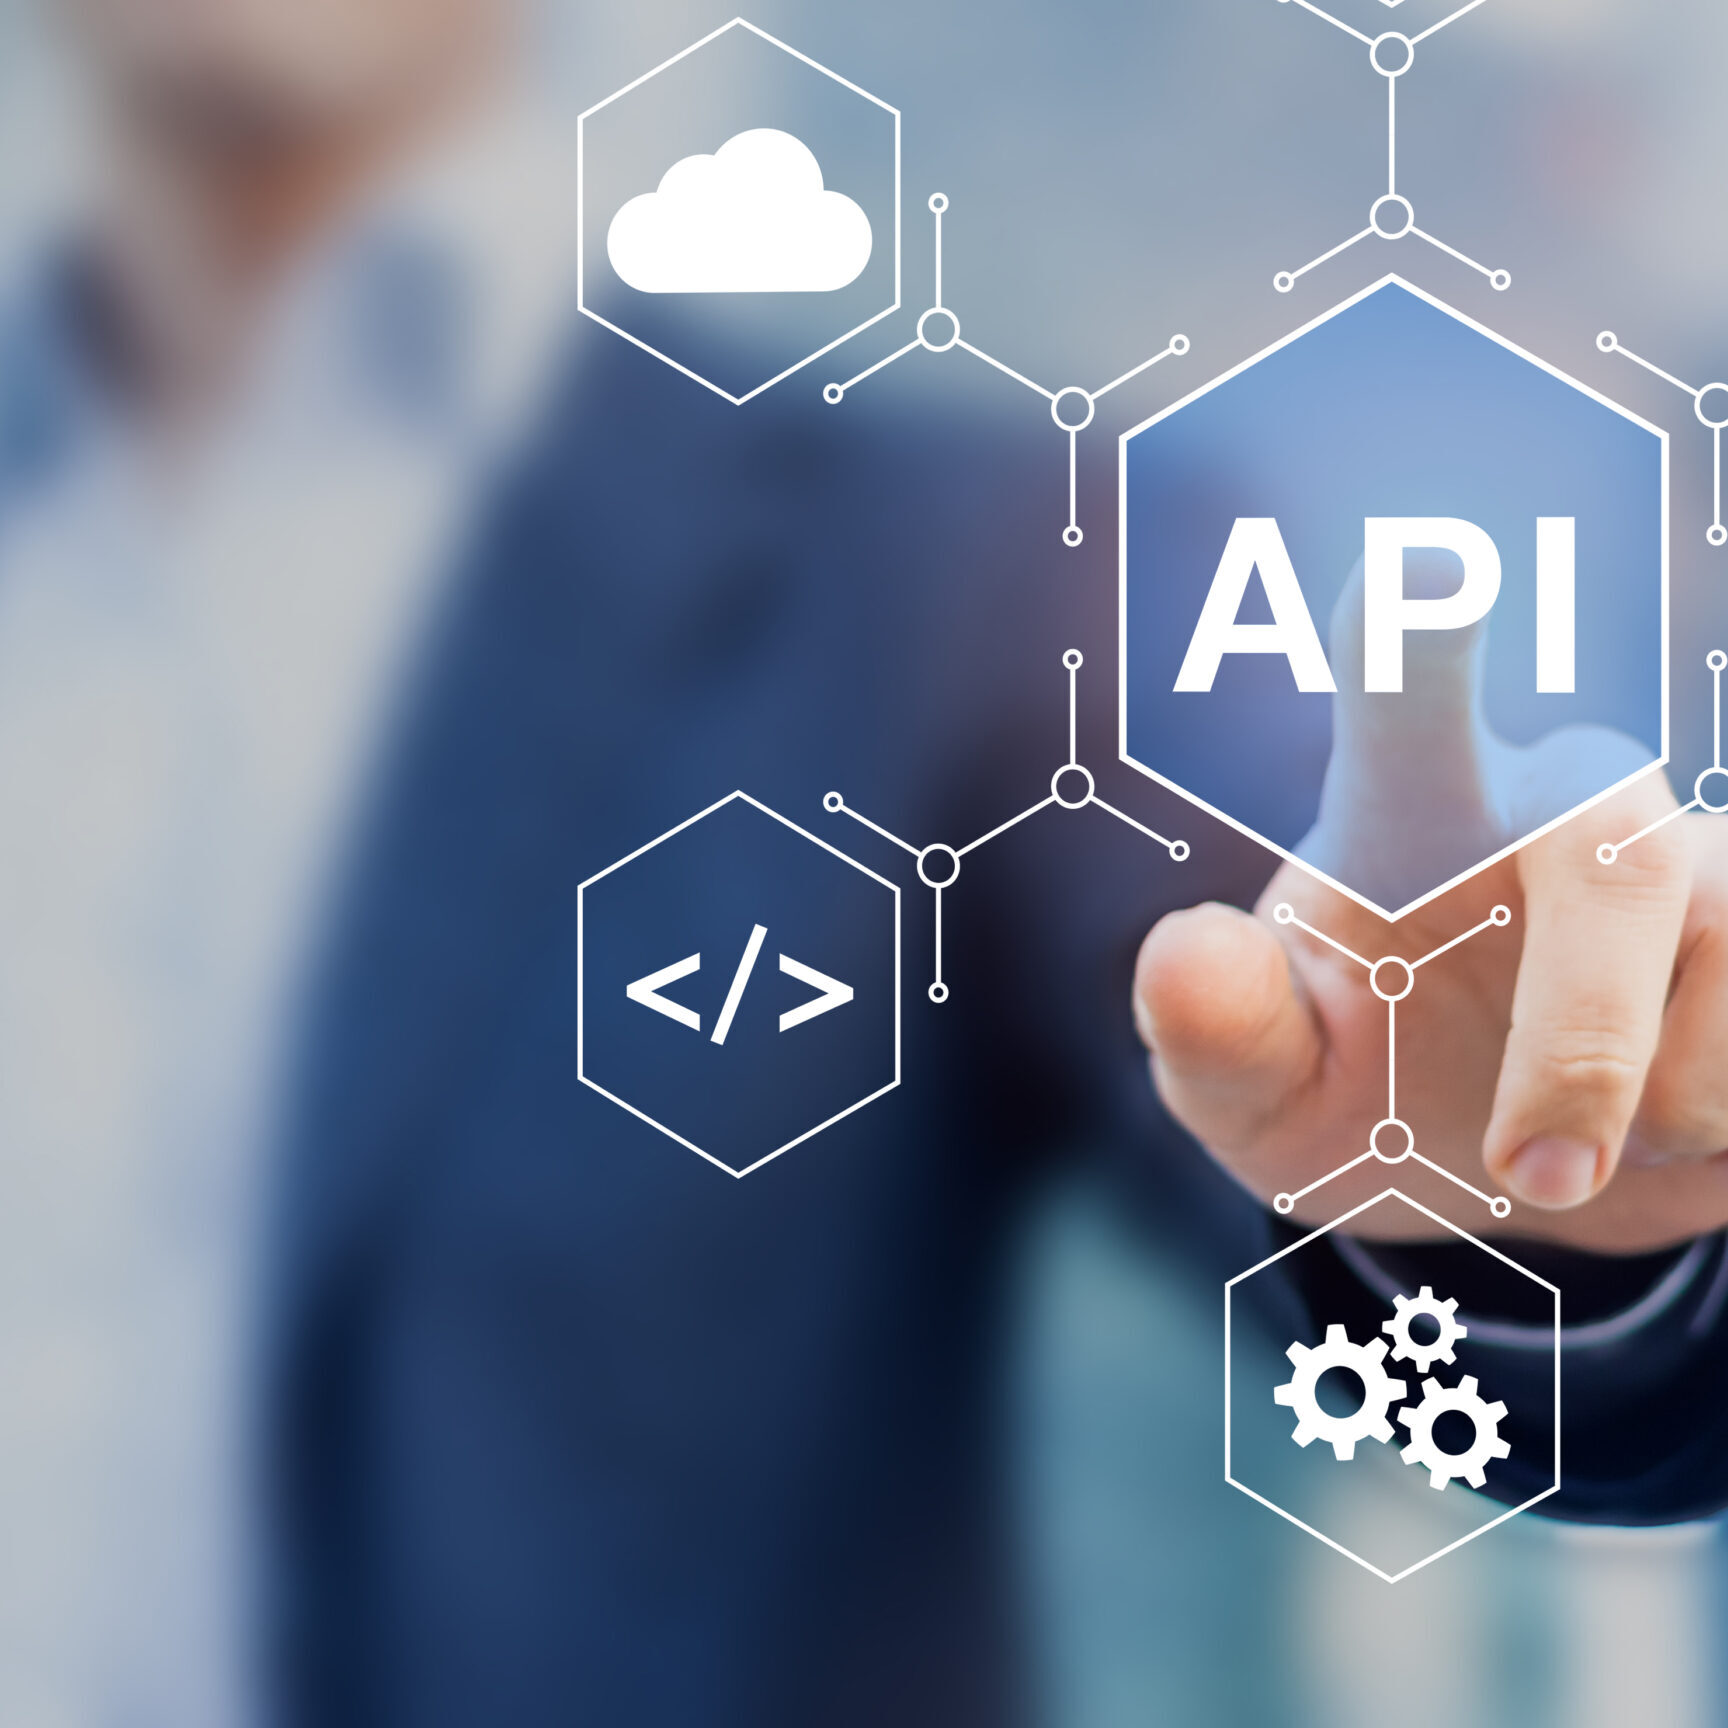 API Application Programming Interface connect services on internet and allow network data communication, software engineer touching concept for IoT, cloud computing, robotic process automation